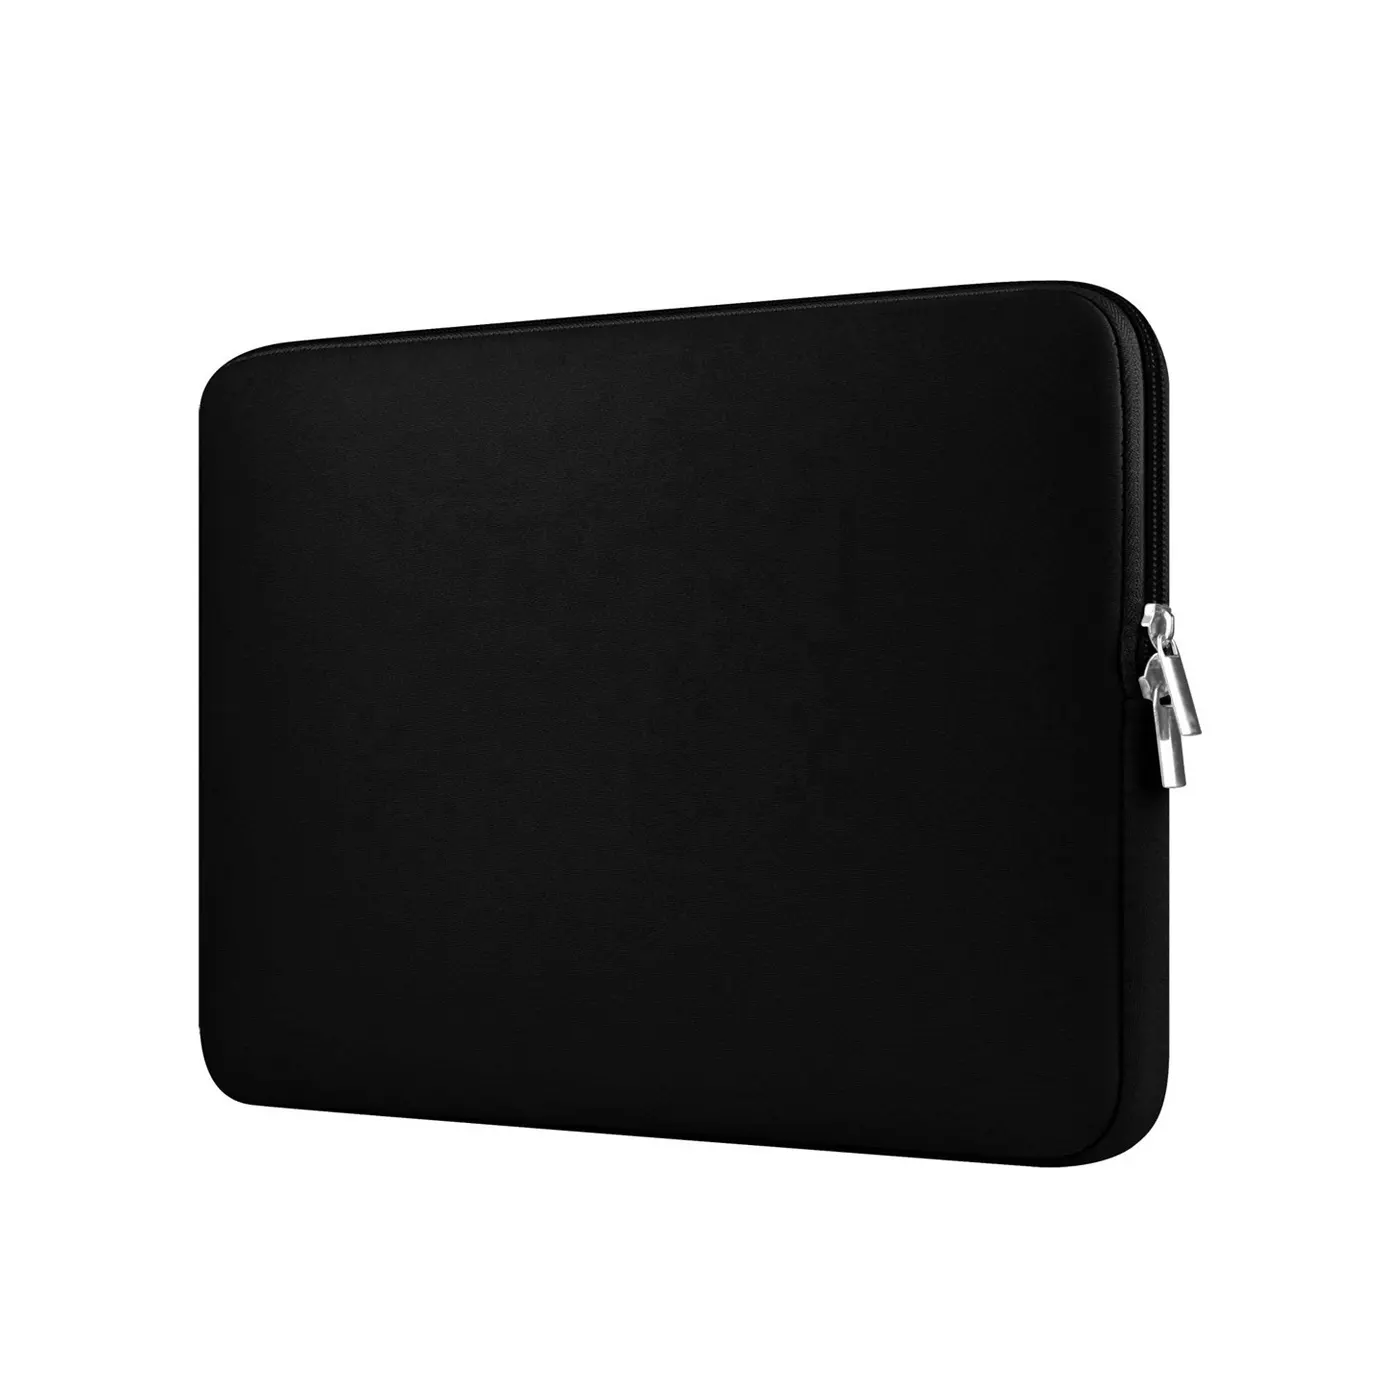 15 Inch Laptop Sleeve 15.6-inch Soft Case Cover 15" Neoprene Computer Notebook Protective Bag